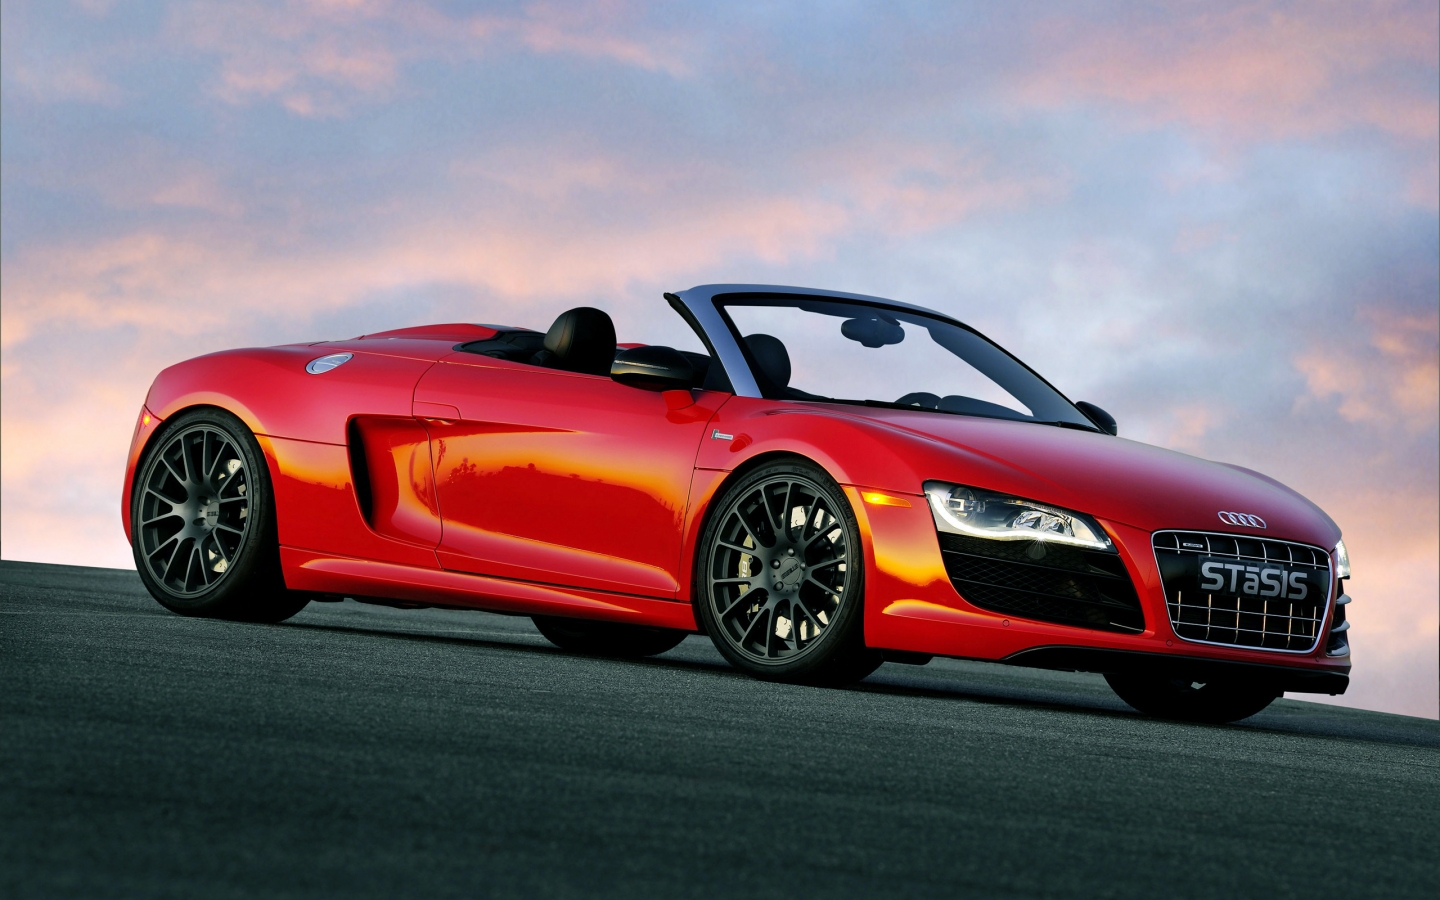 Stasis Audi R8 V10 for 1440 x 900 widescreen resolution